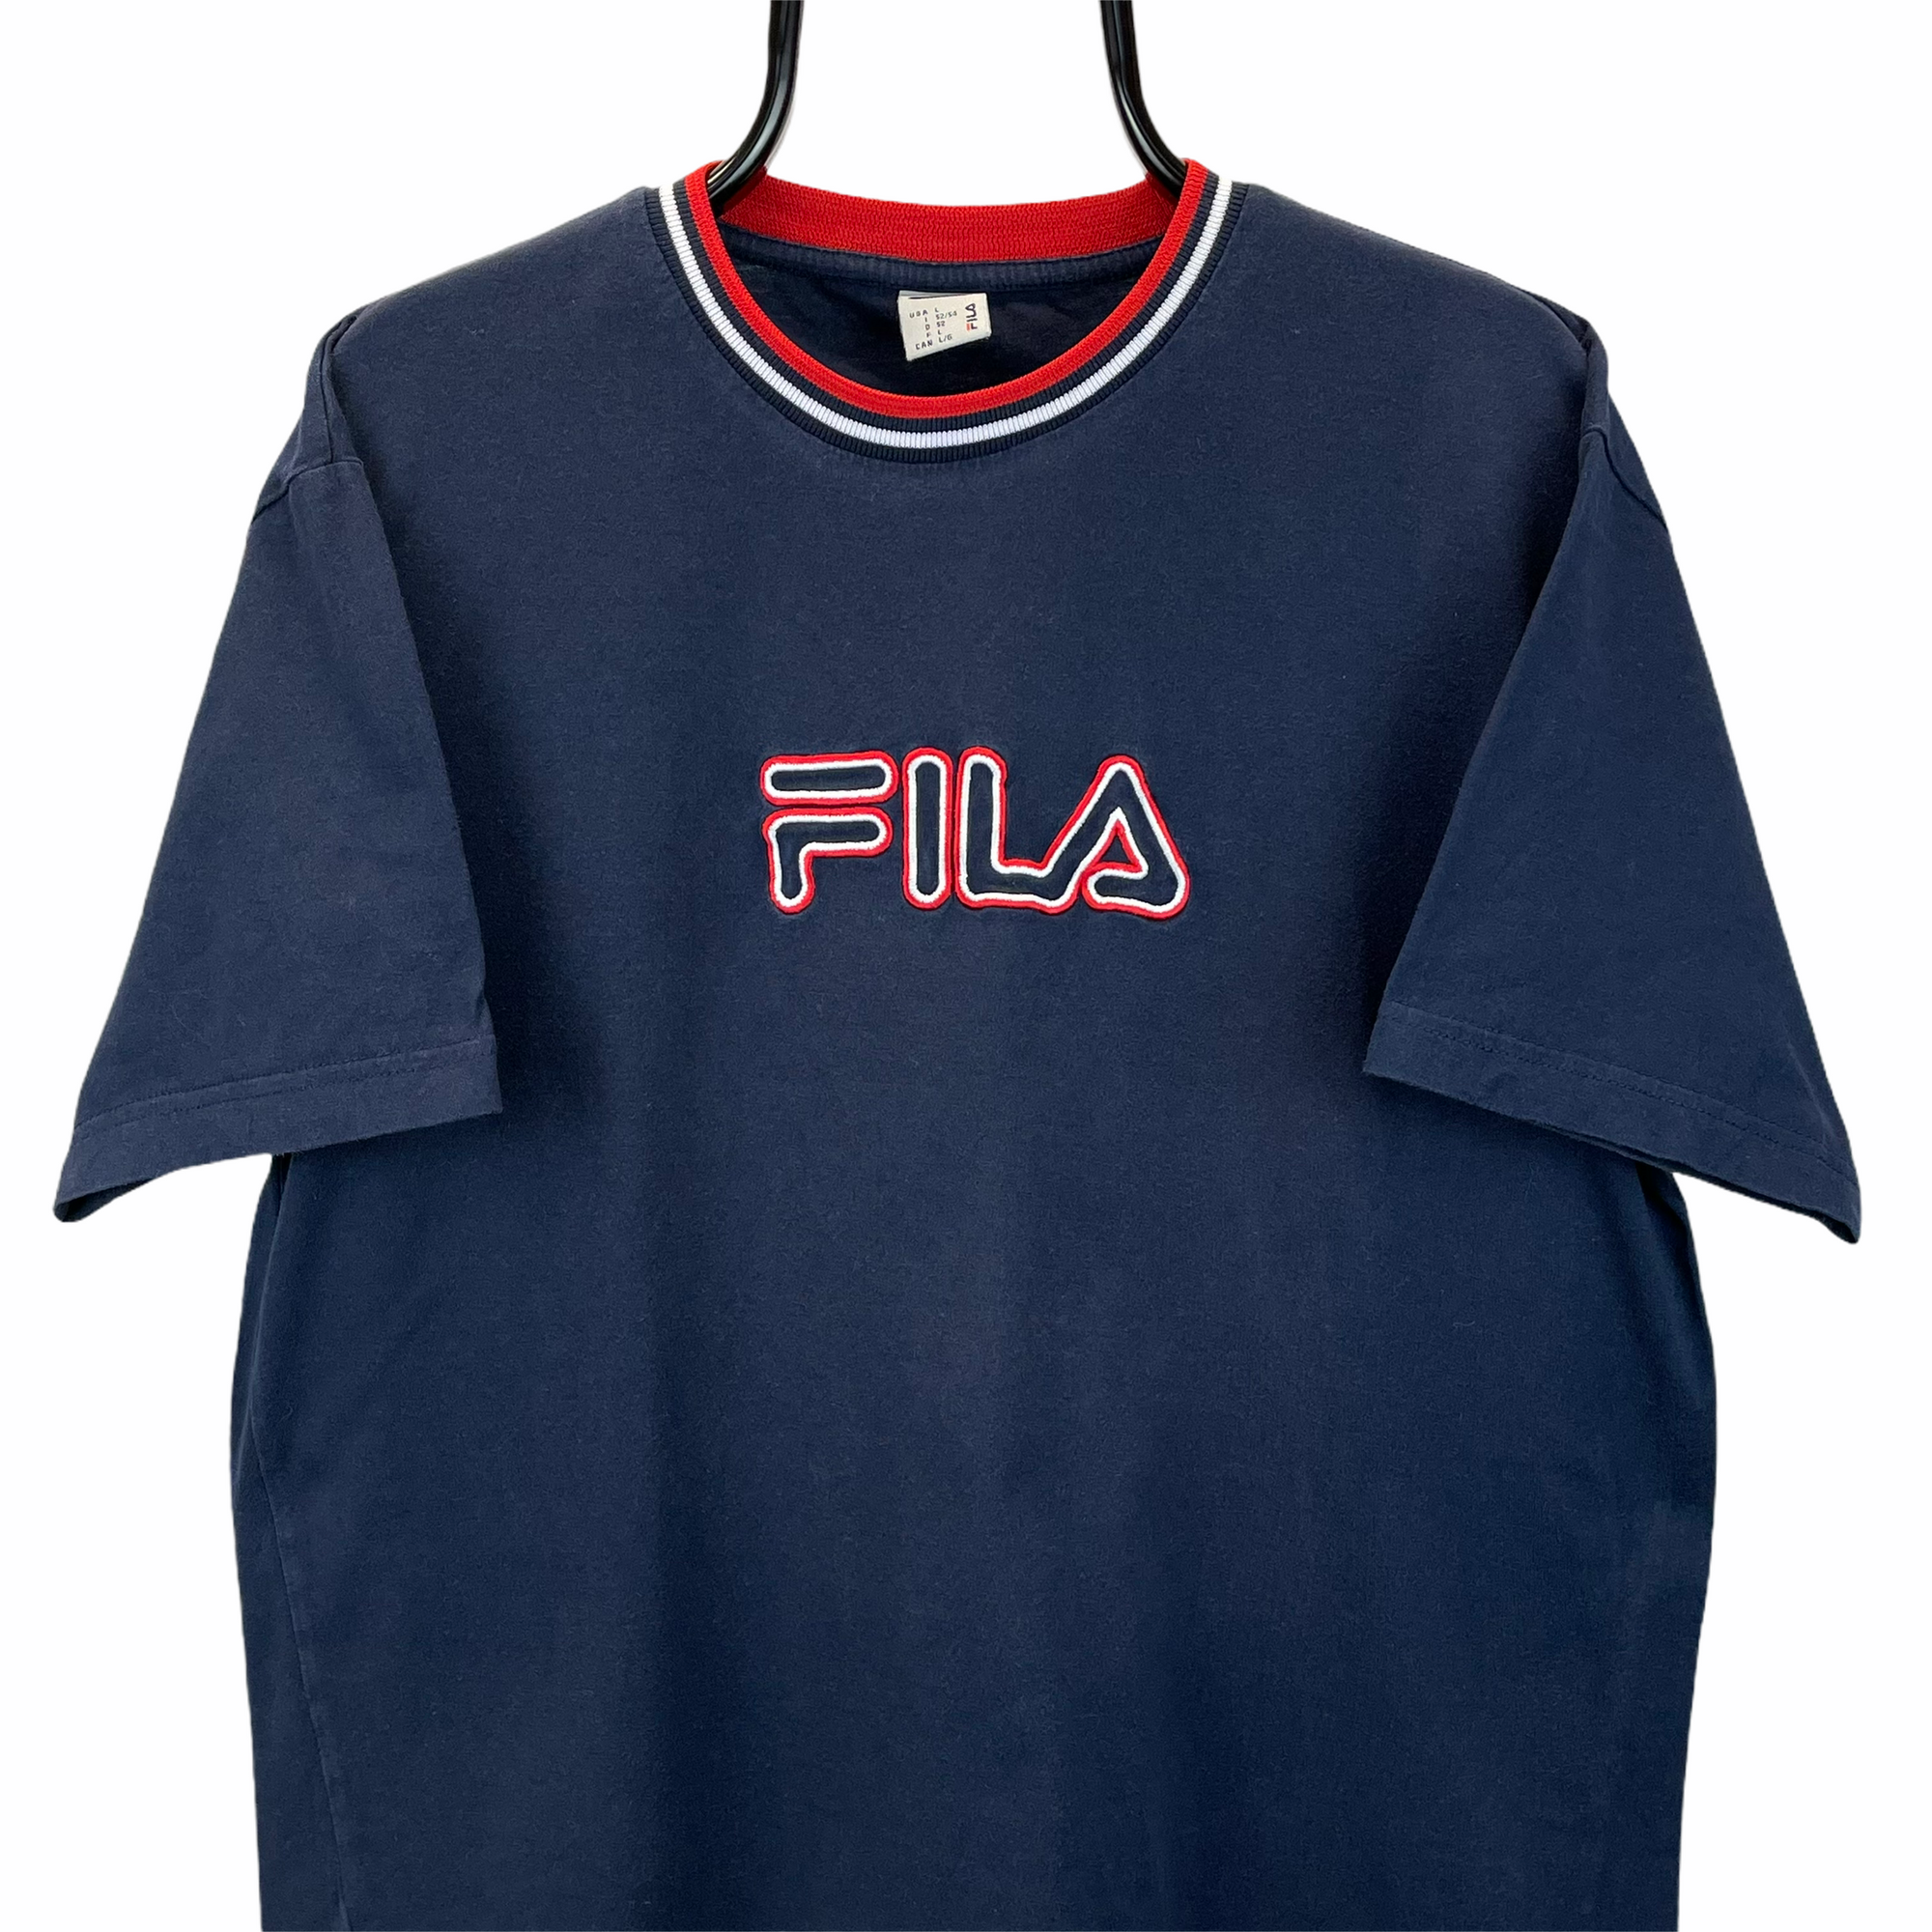 Vintage Fila Embroidered Spellout Tee in Navy & Red - Men's Large/Women's XL